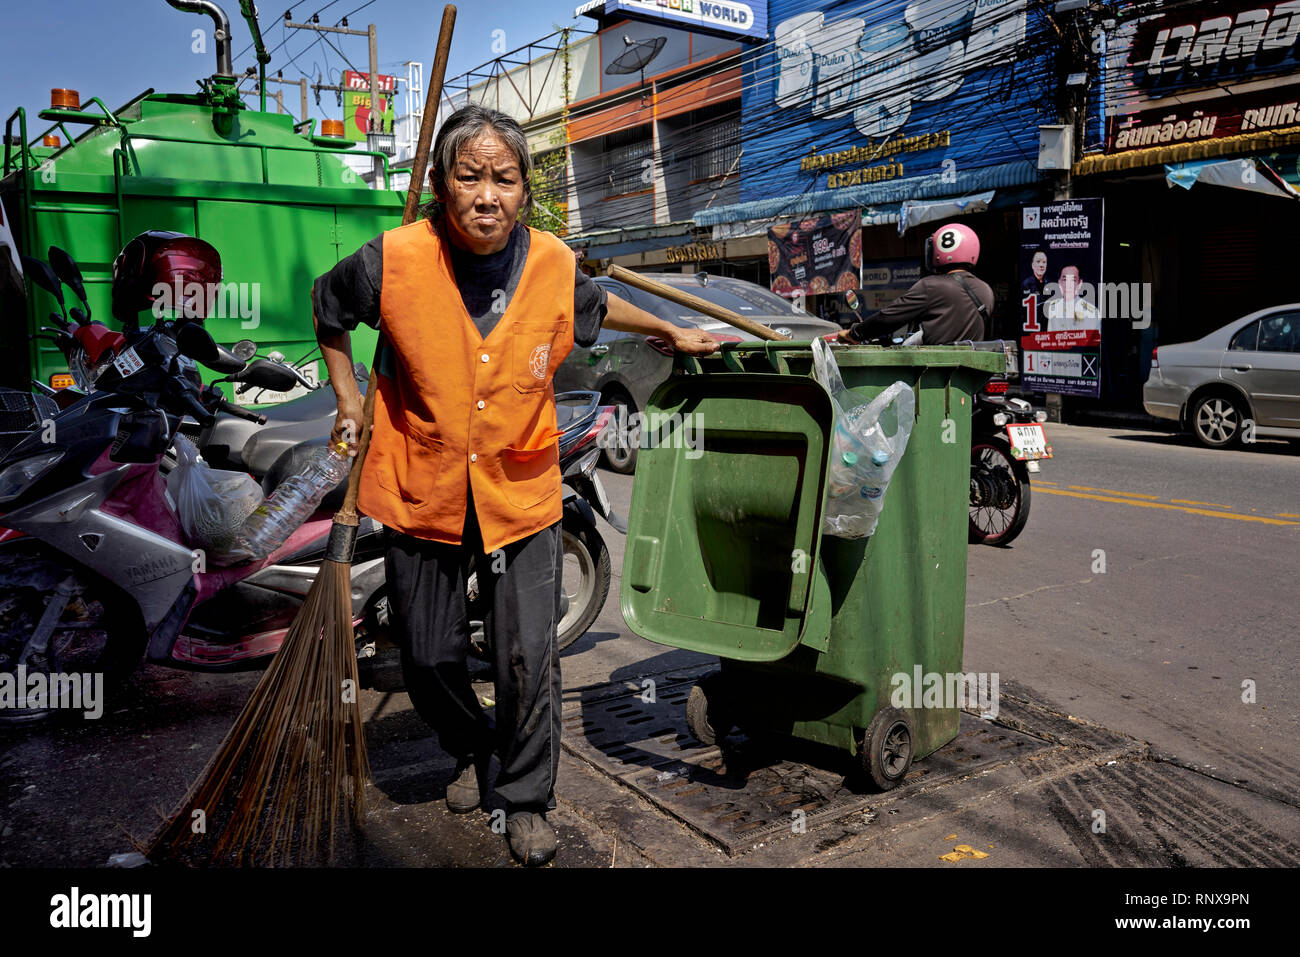 Street cleaner. Elderly Thai woman refuse collector. Thailand, Southeast Asia Stock Photo